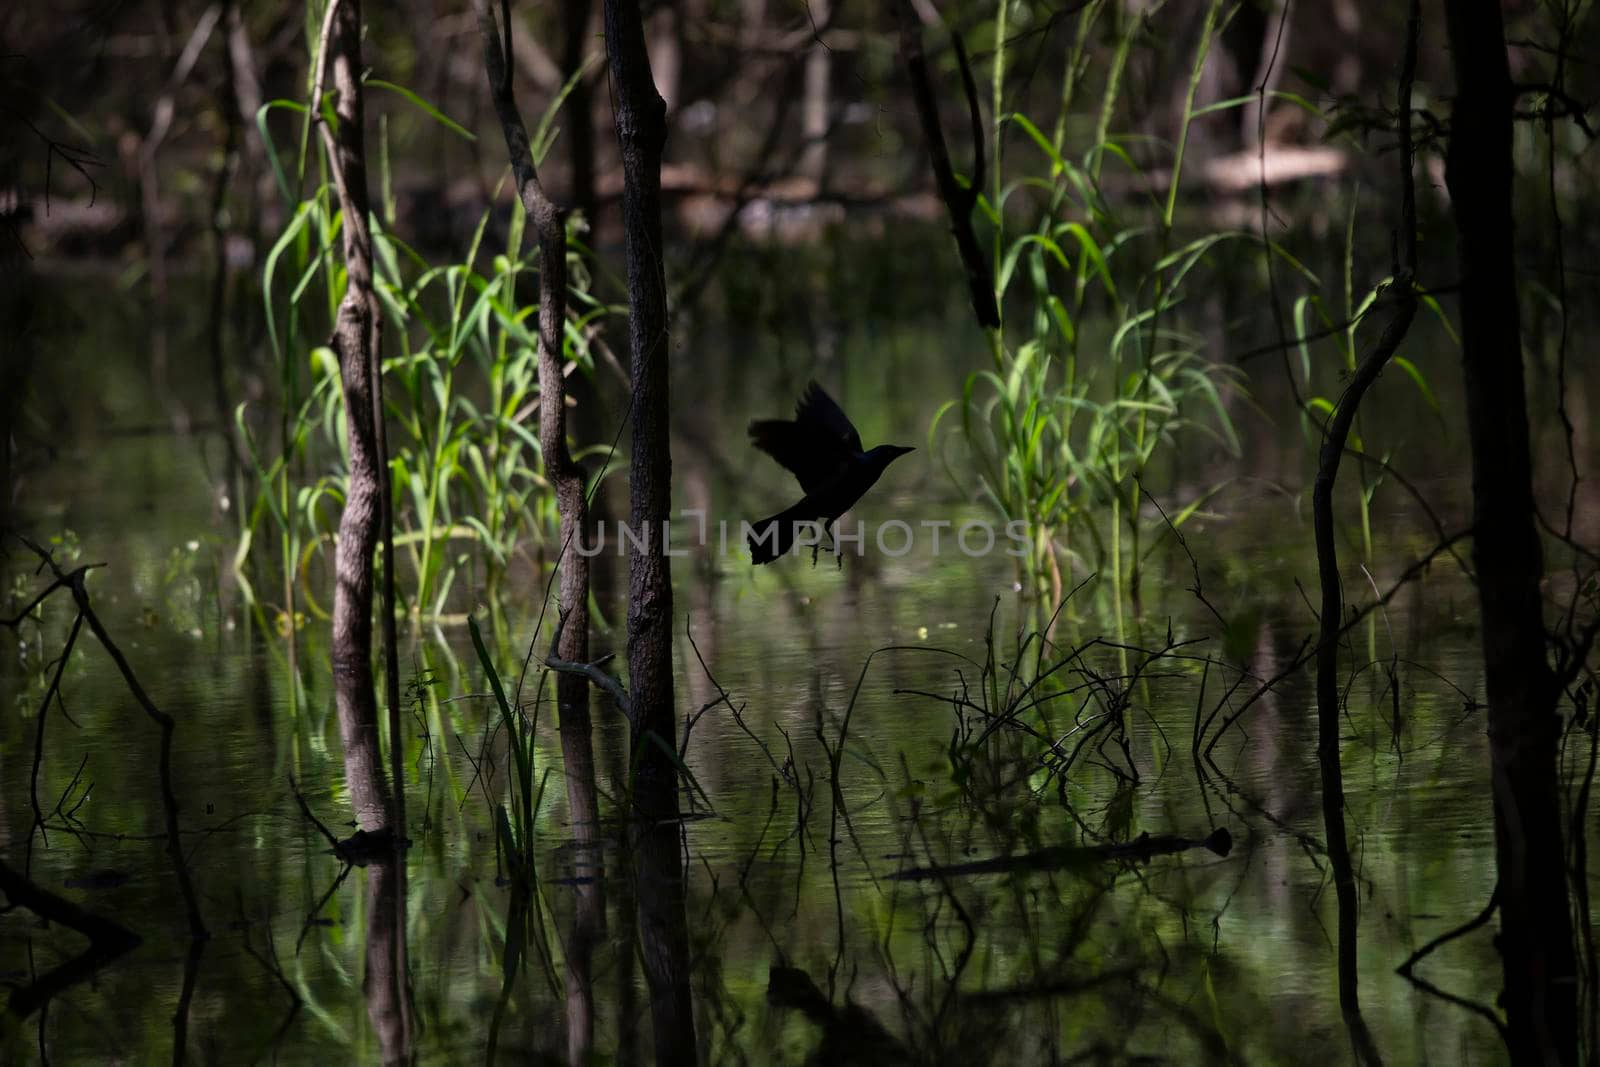 Common grackle silhouette taking off from a tree in the swamp